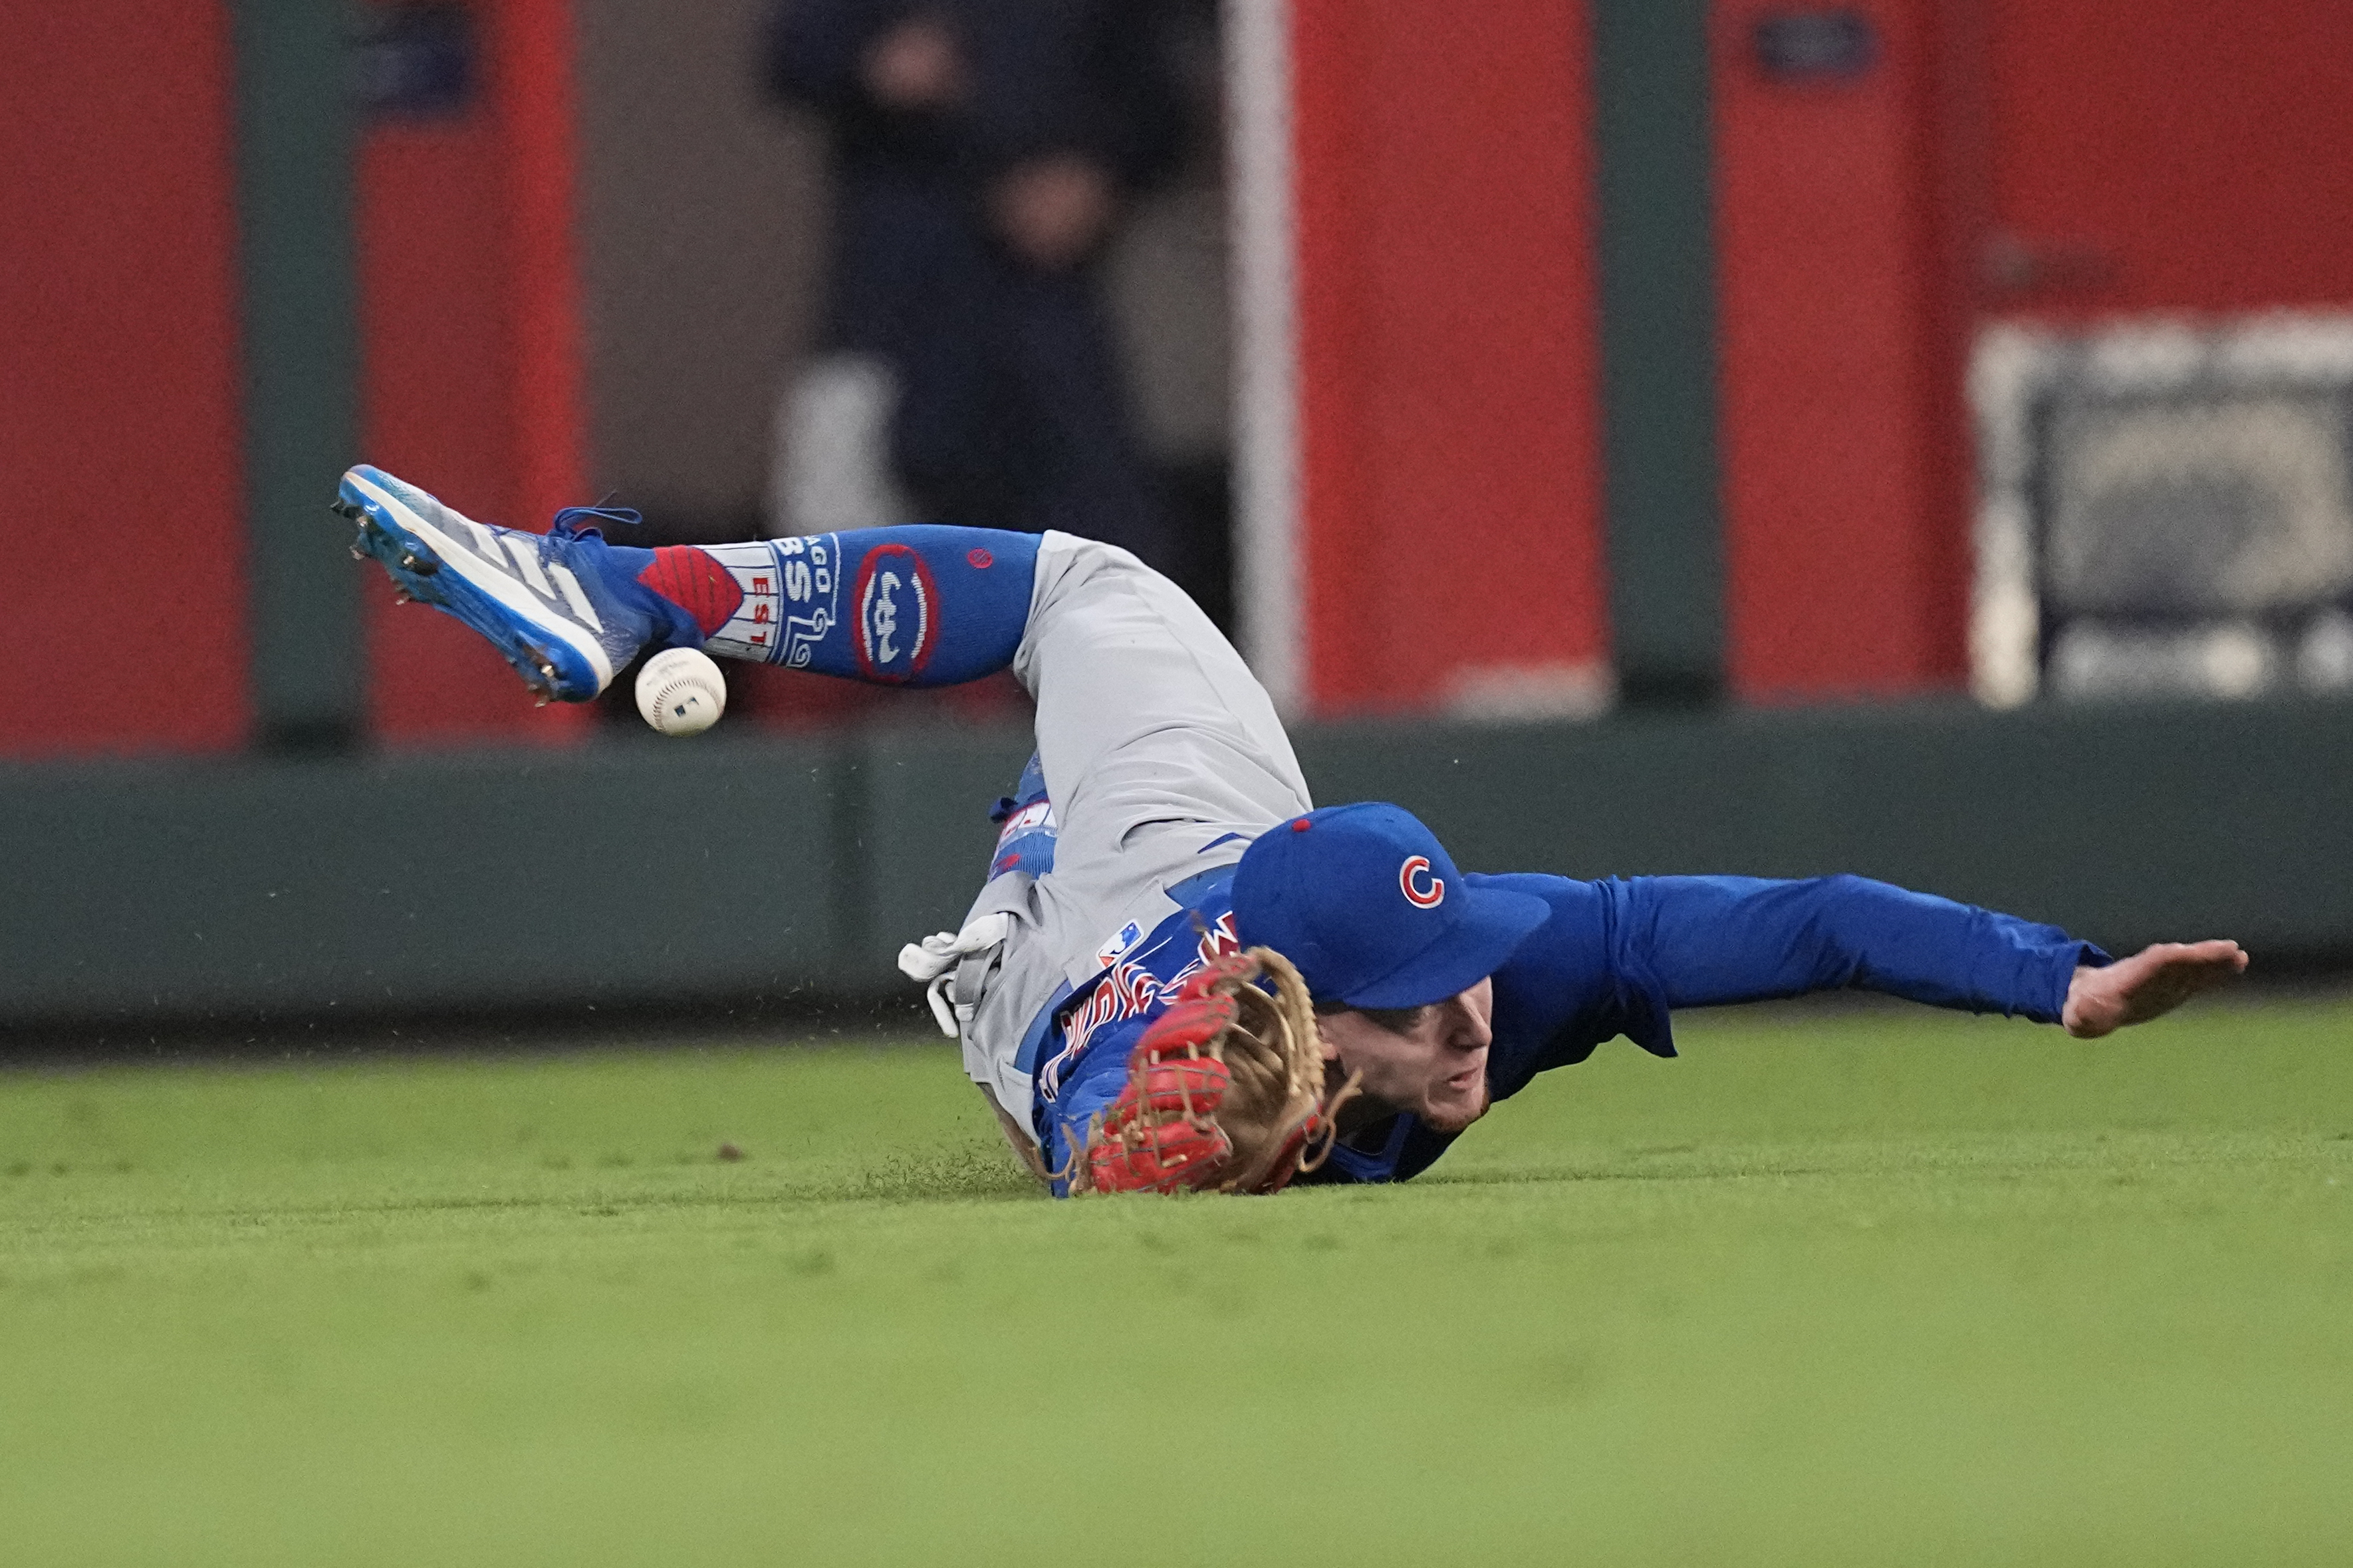 Cubs fall to Braves after Seiya Suzuki's late error